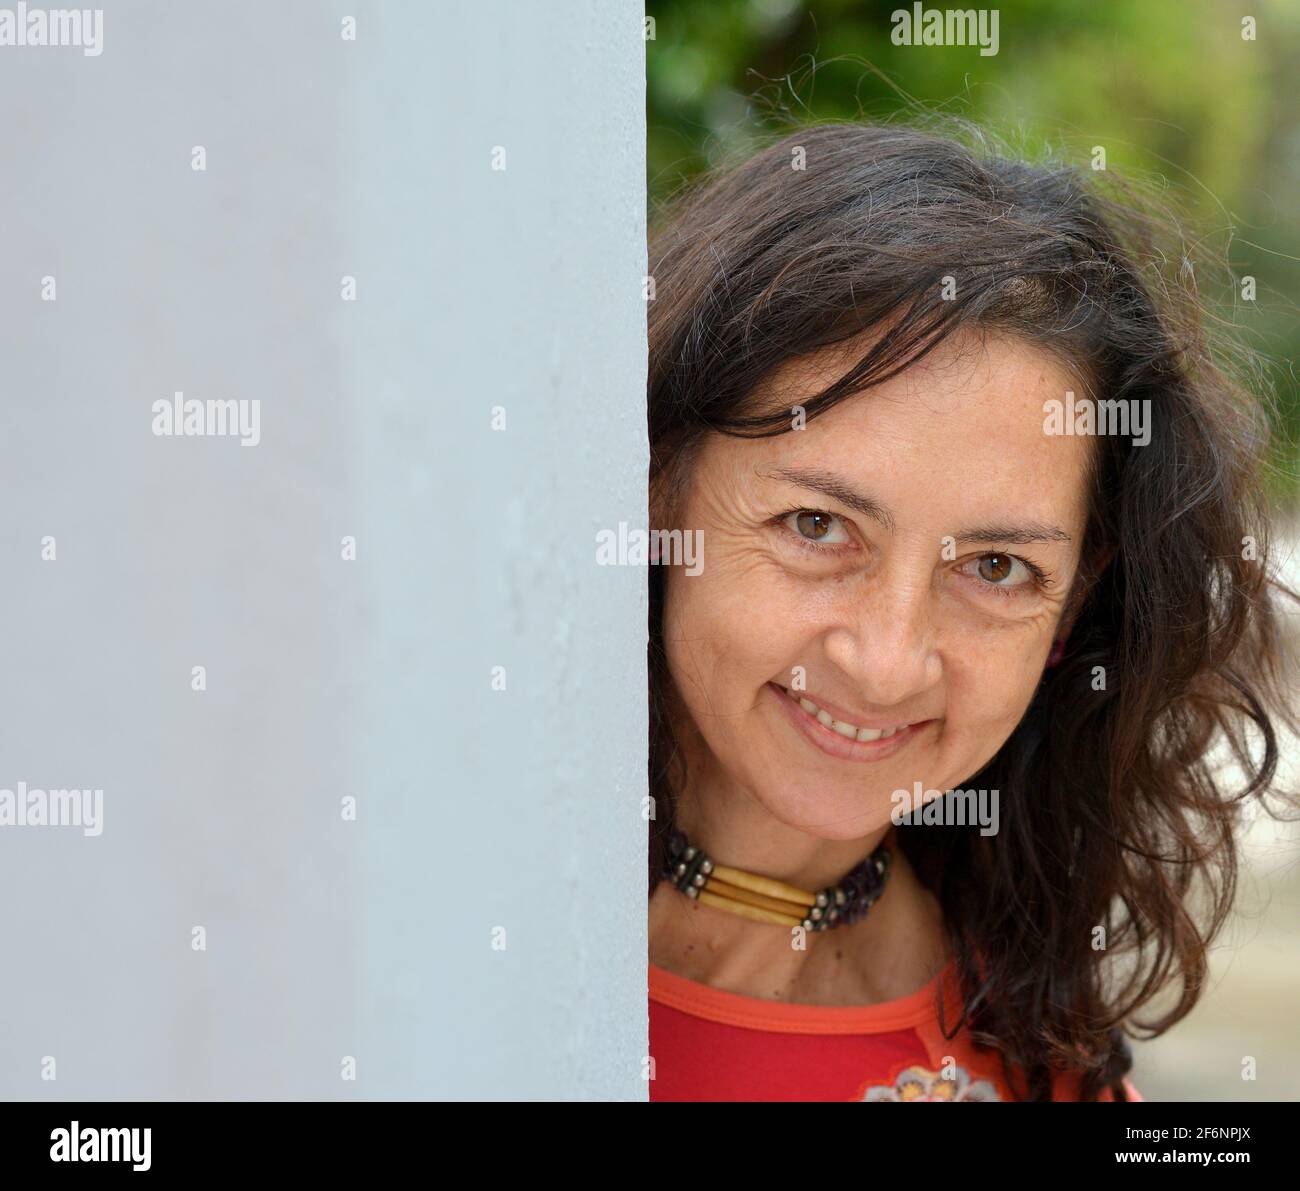 Charming mature Caucasian brunette woman with long hair peeks around a grey wall and makes a happy facial expression in front of a park background. Stock Photo